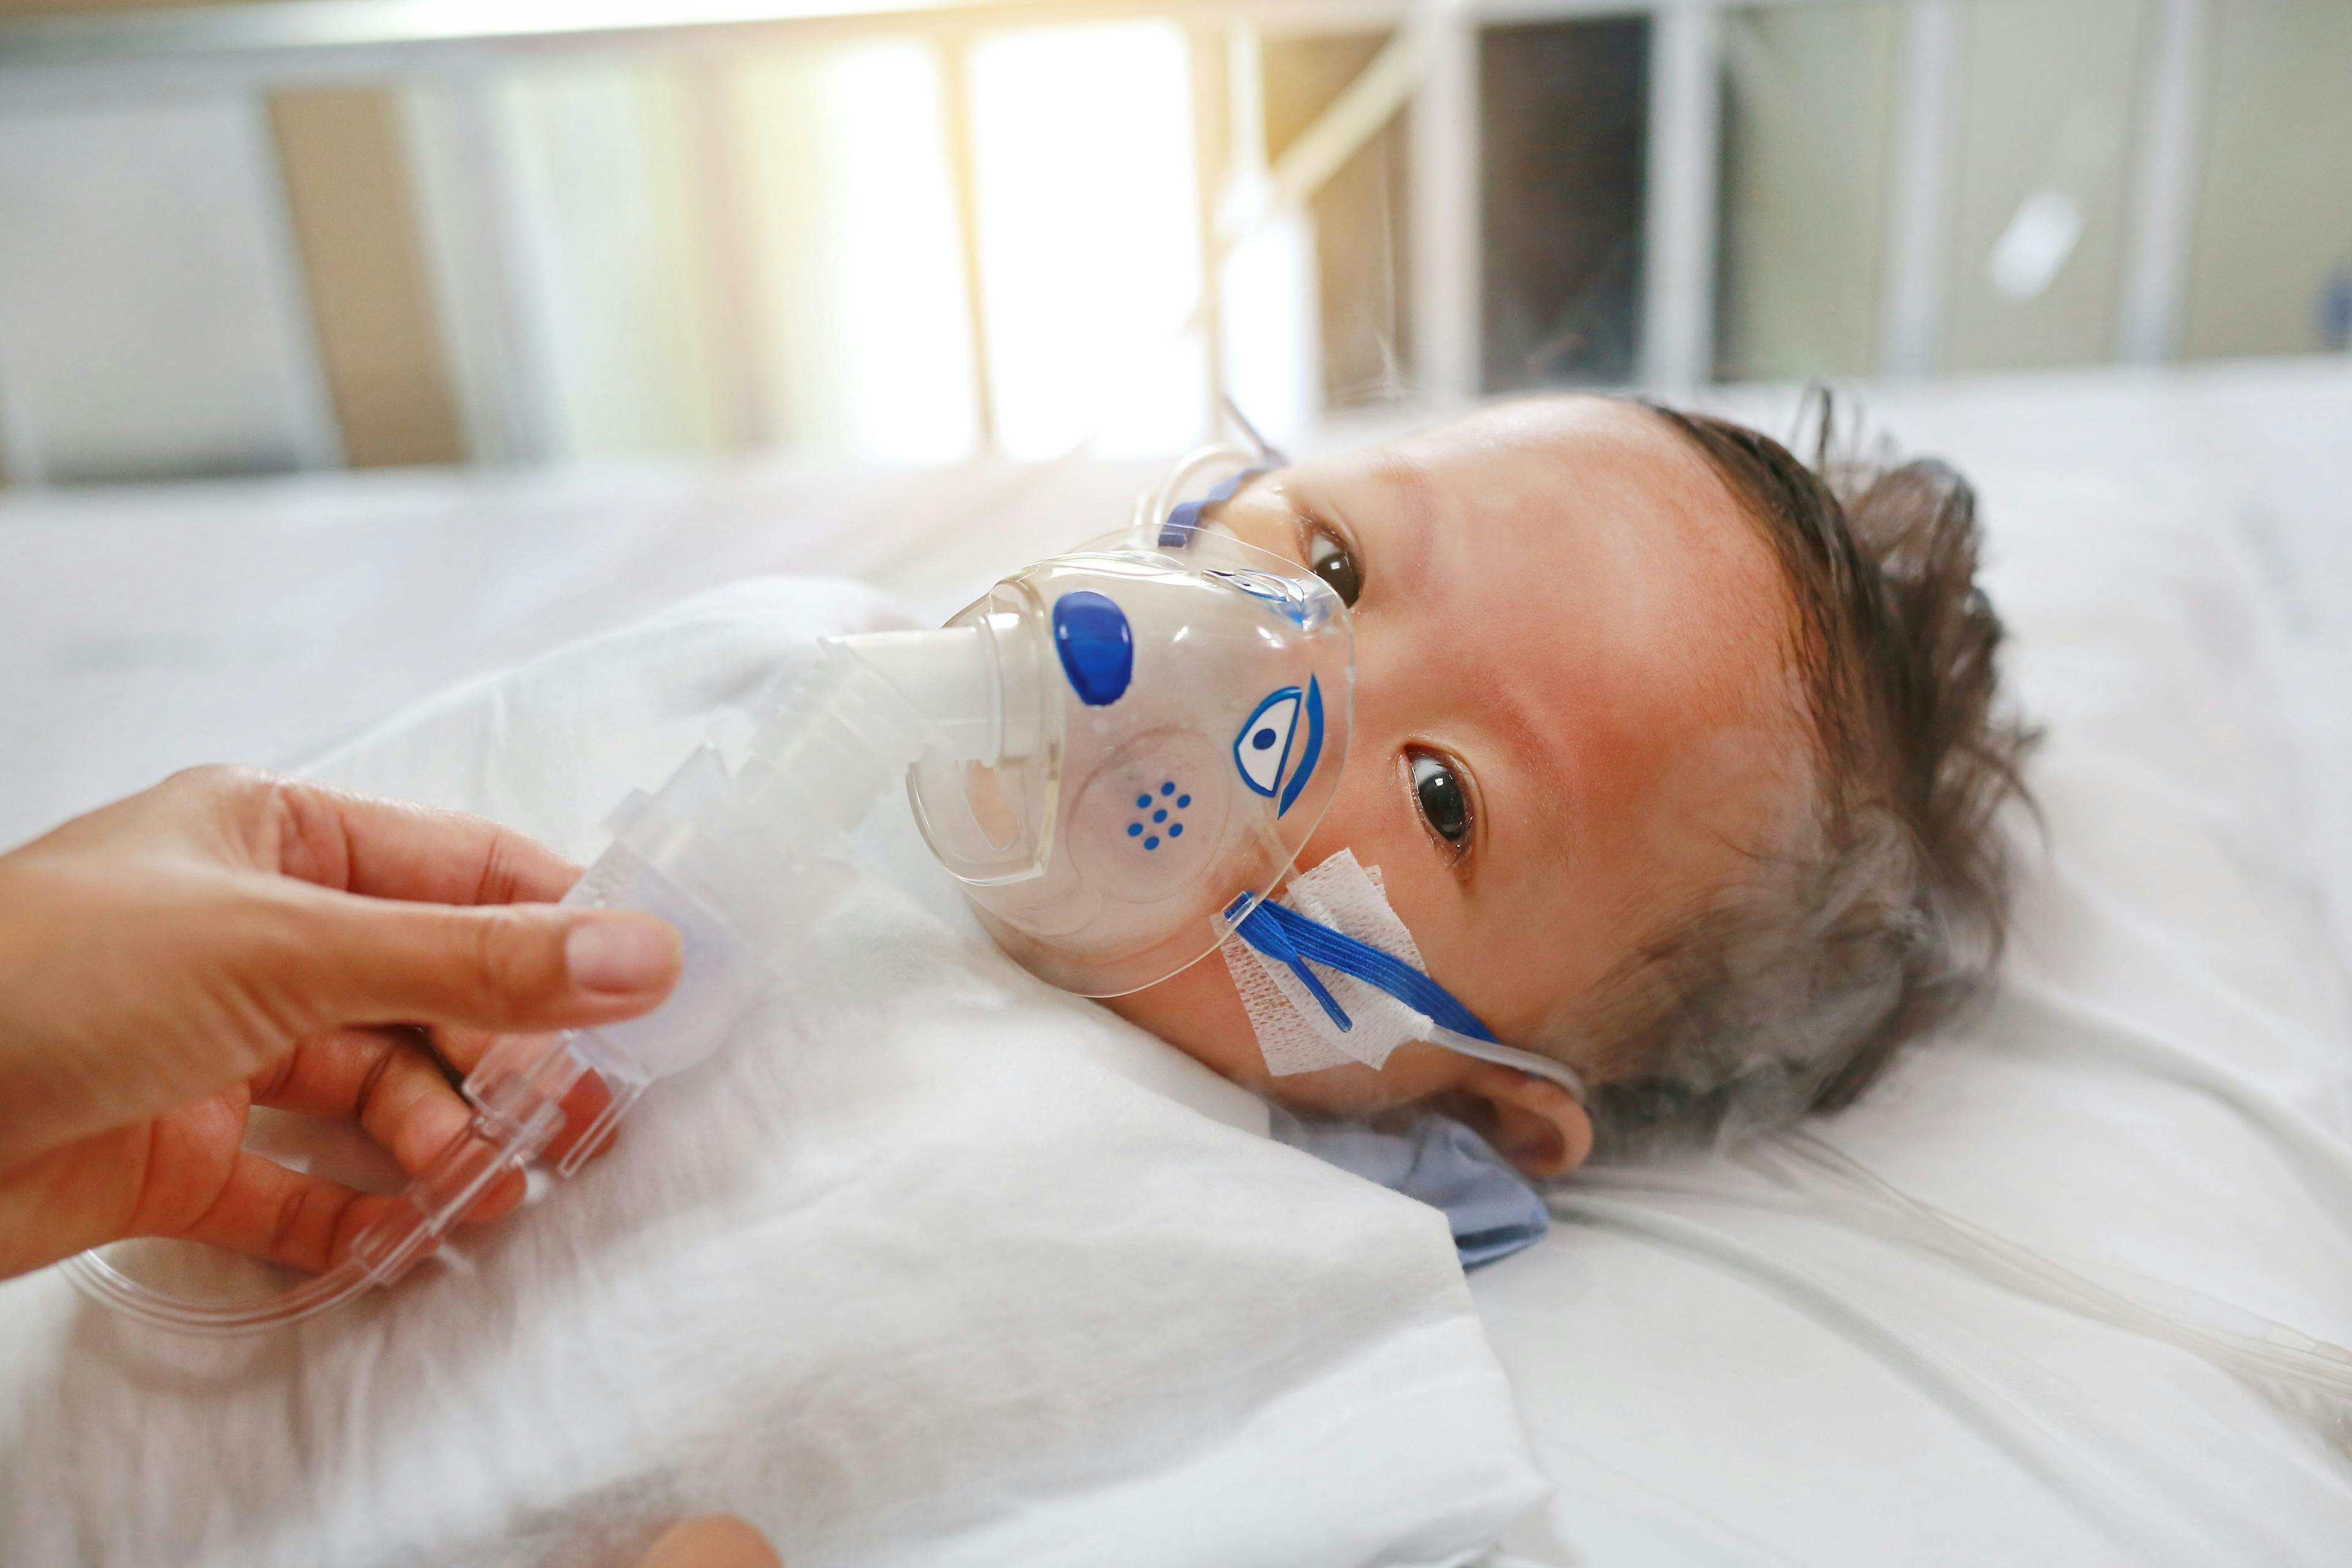 Sick baby boy applying inhale medication by inhalation mask to cure Respiratory Syncytial Virus (RSV) on patient bed at hospital -Image credit: Zilvergolf | stock.adobe.com